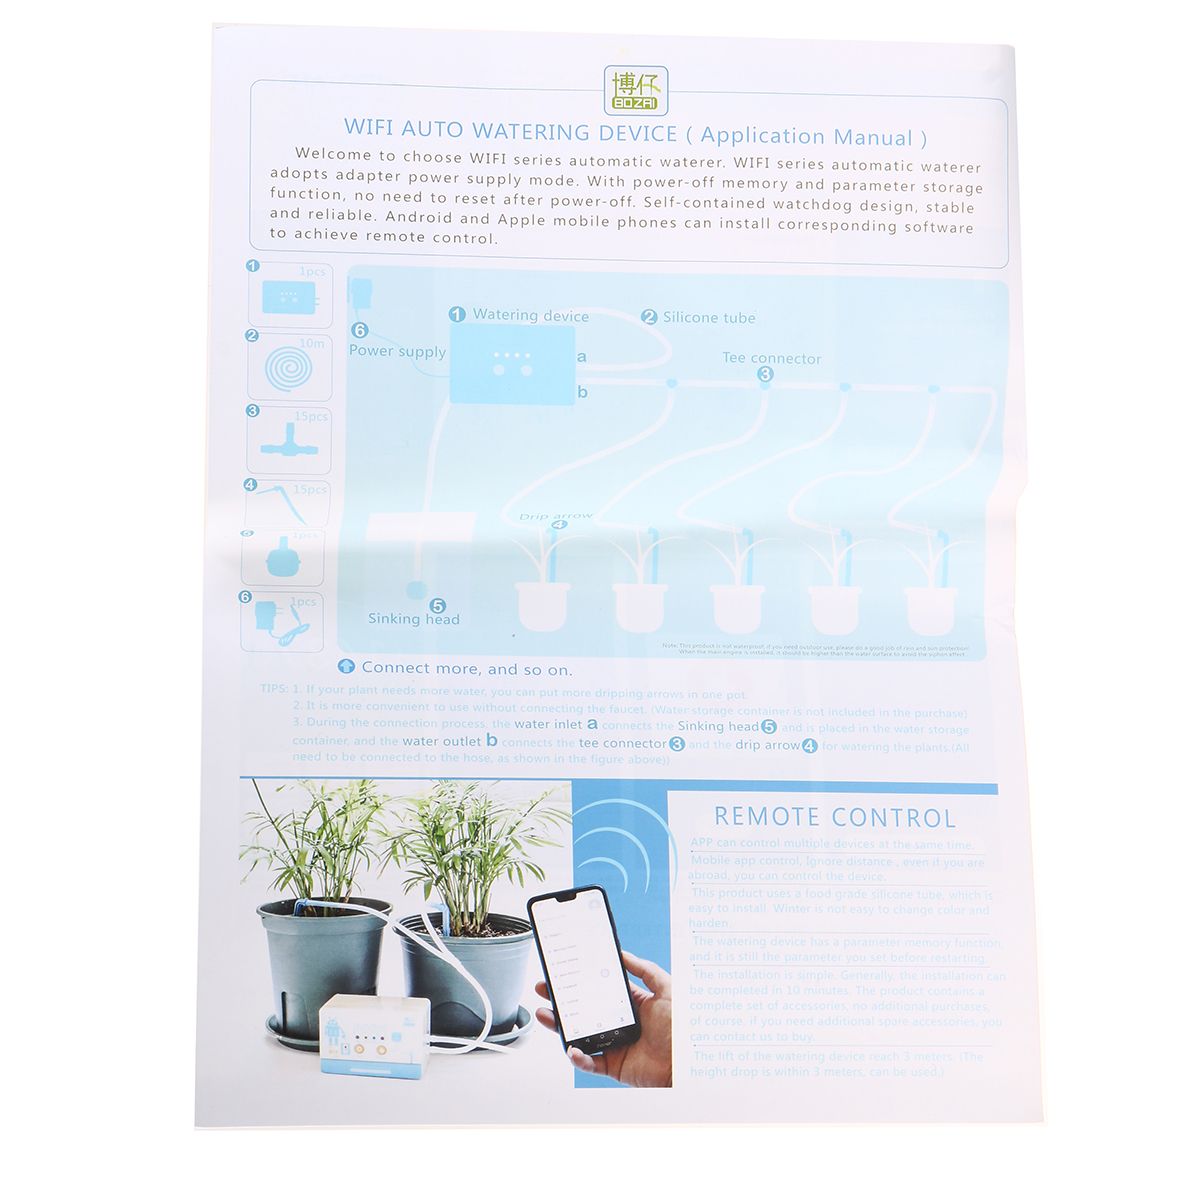 Wifi-Control-Automatic-Watering-Device-10m-Hose-Drip-Irrigation-Timing-System-1685242